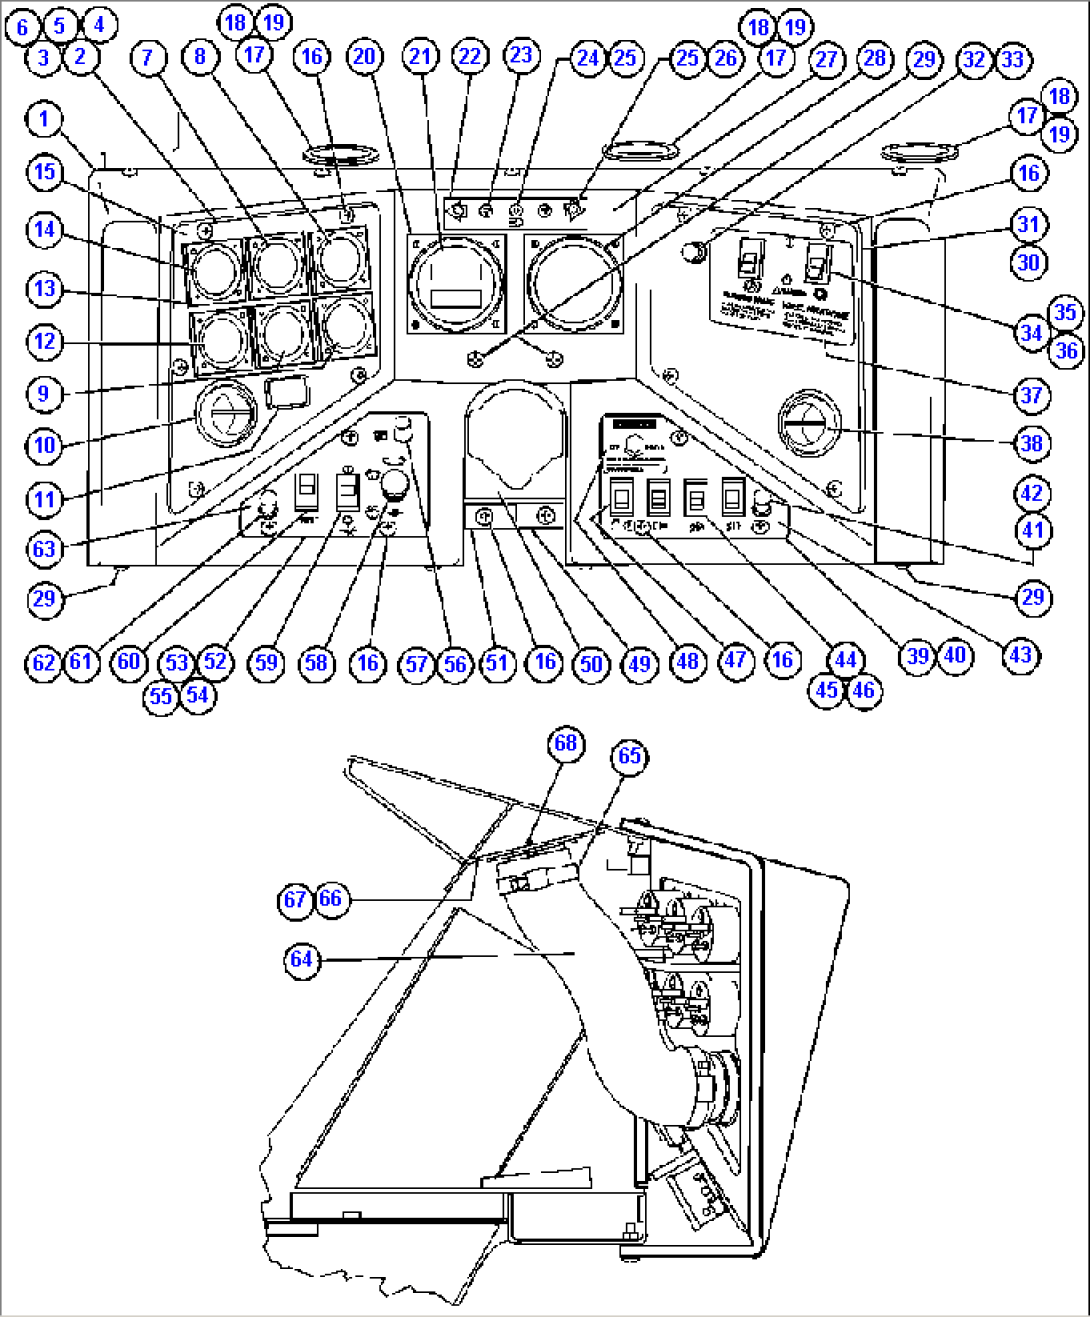 INSTRUMENT PANEL ASSEMBLY